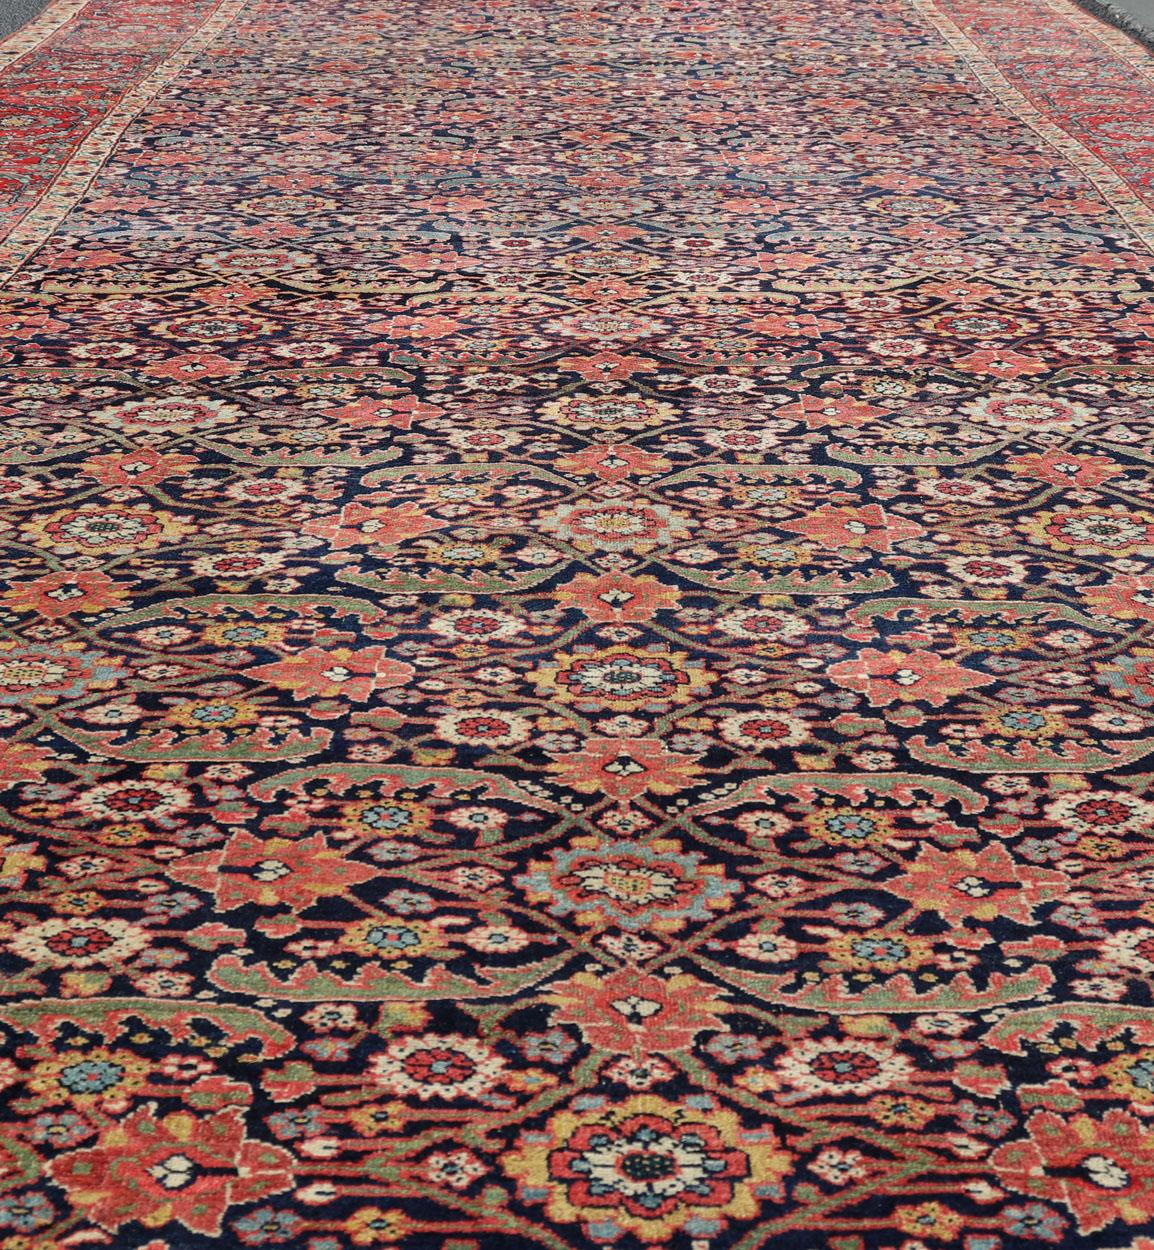 1850 antique Persian Joshegan large gallery rug in blue background, soft red border. 

Measures: 7'4 x 19'0 
 
From the estate of Jack Welch, the American Executive, this circa 1850 Mid-19th Century, antique Joshegan long gallery rug displays